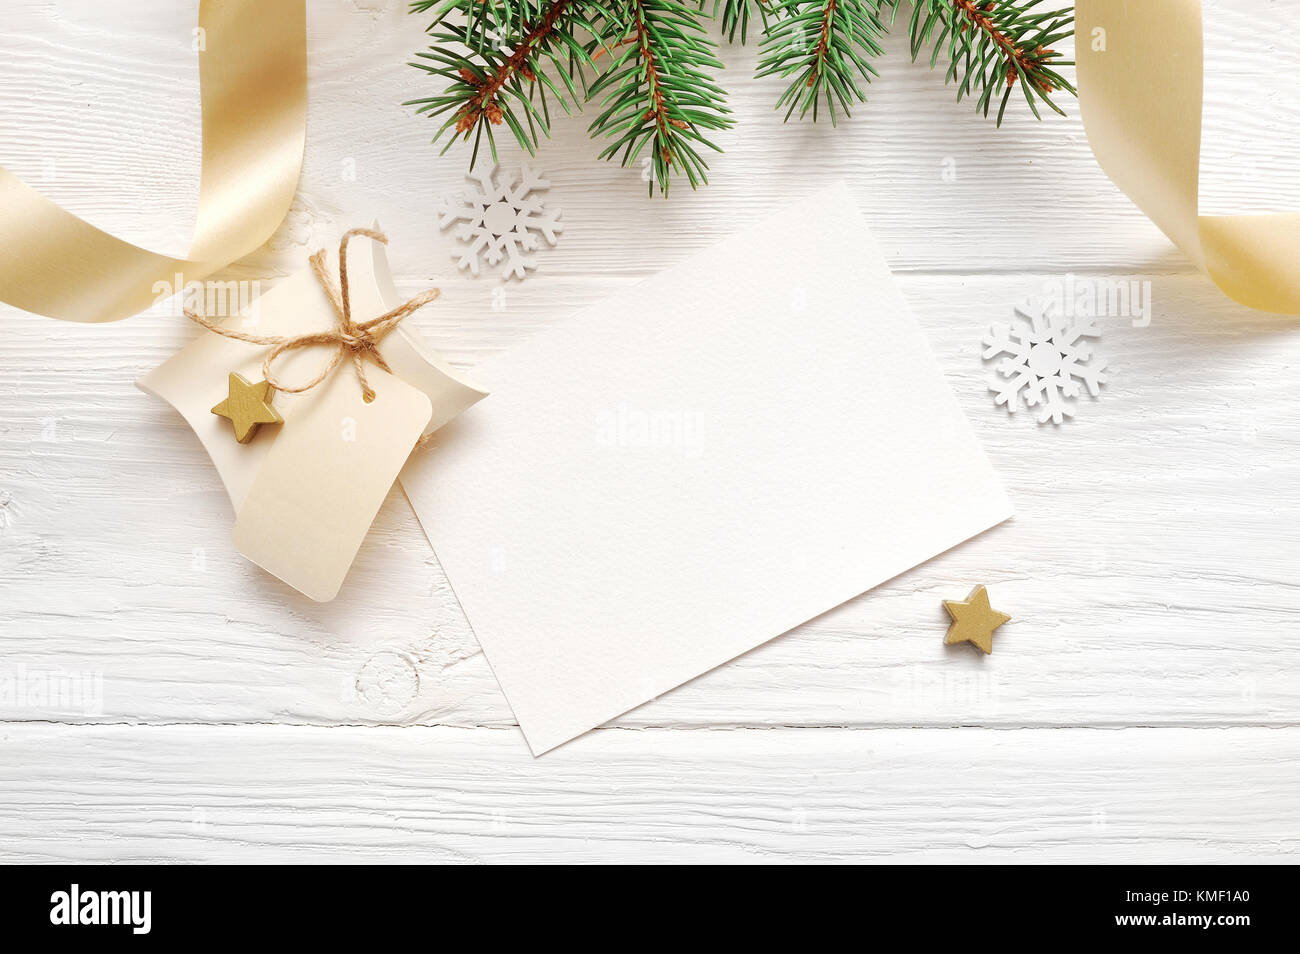 Mockup Christmas decor top view and gold ribbon, flatlay on a white wooden background, with place for your text Stock Photo